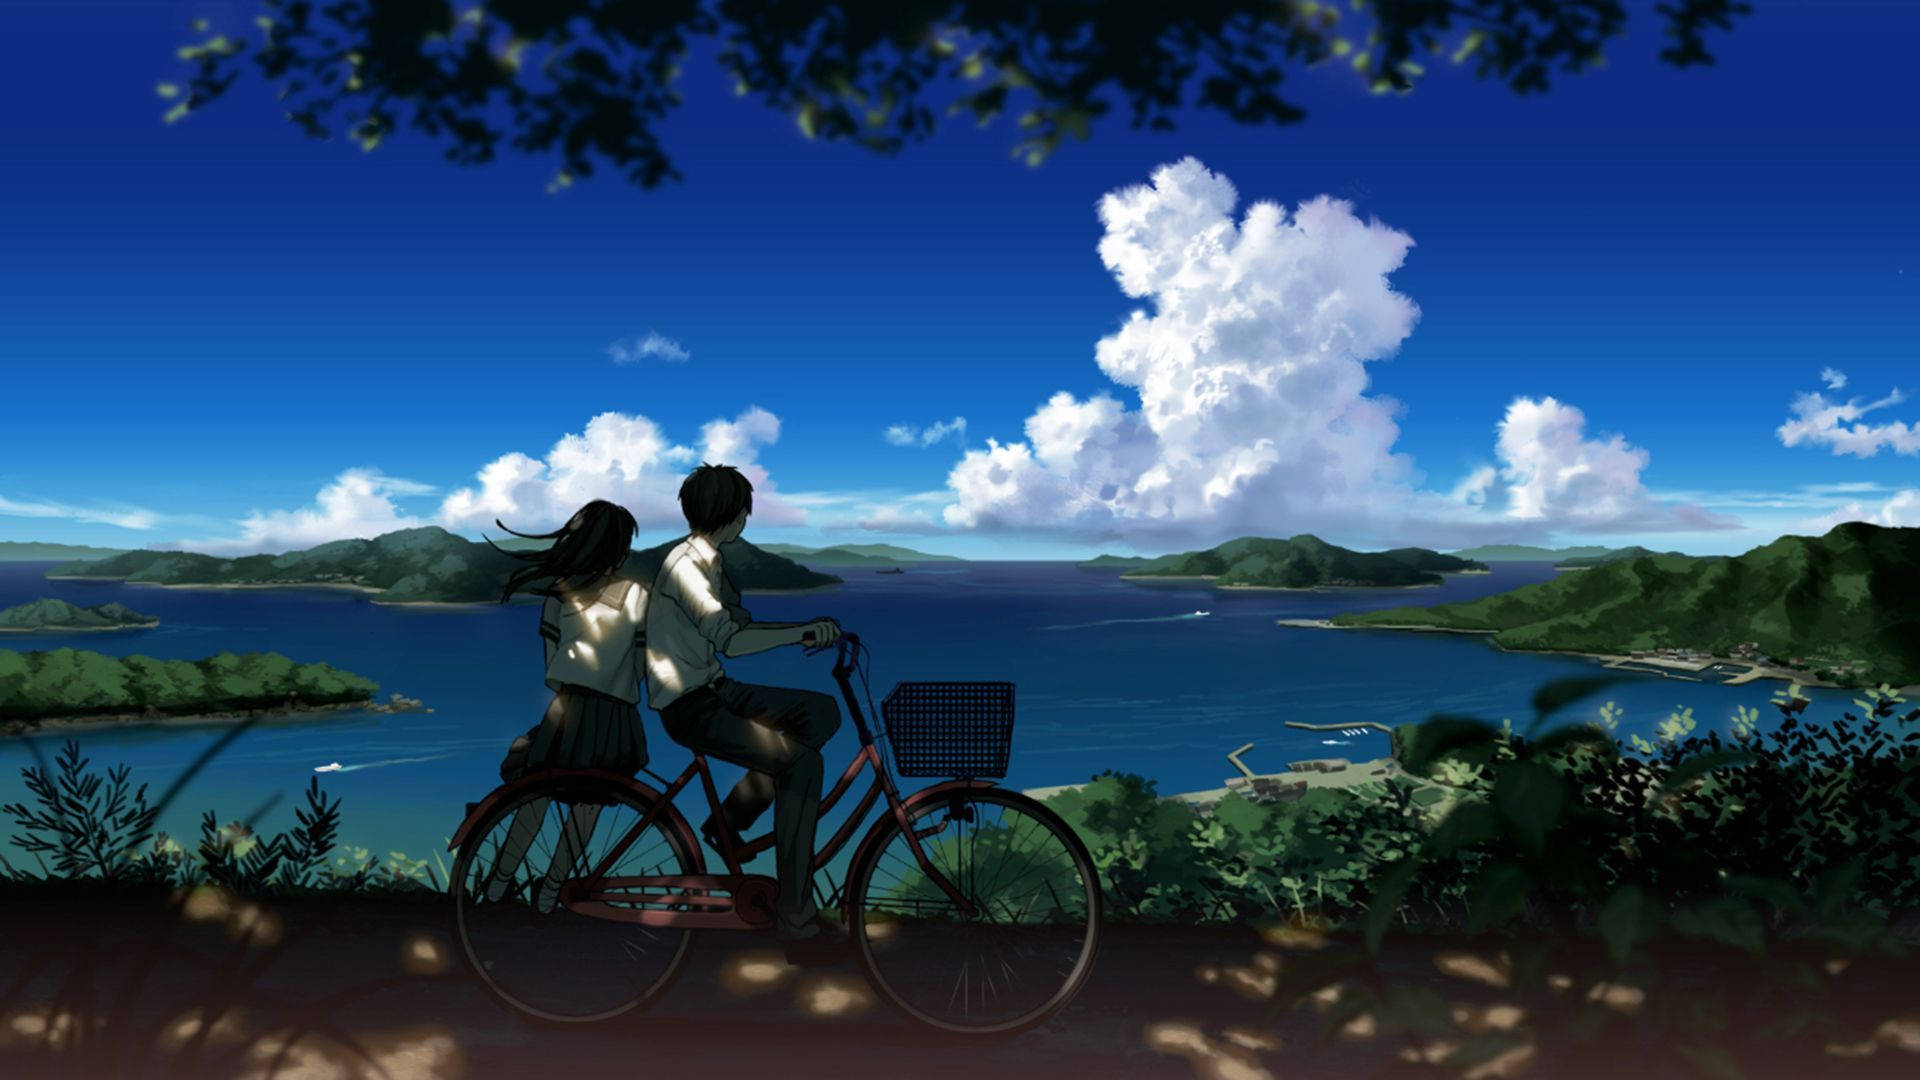 Boy And Girl Anime Scenery Background